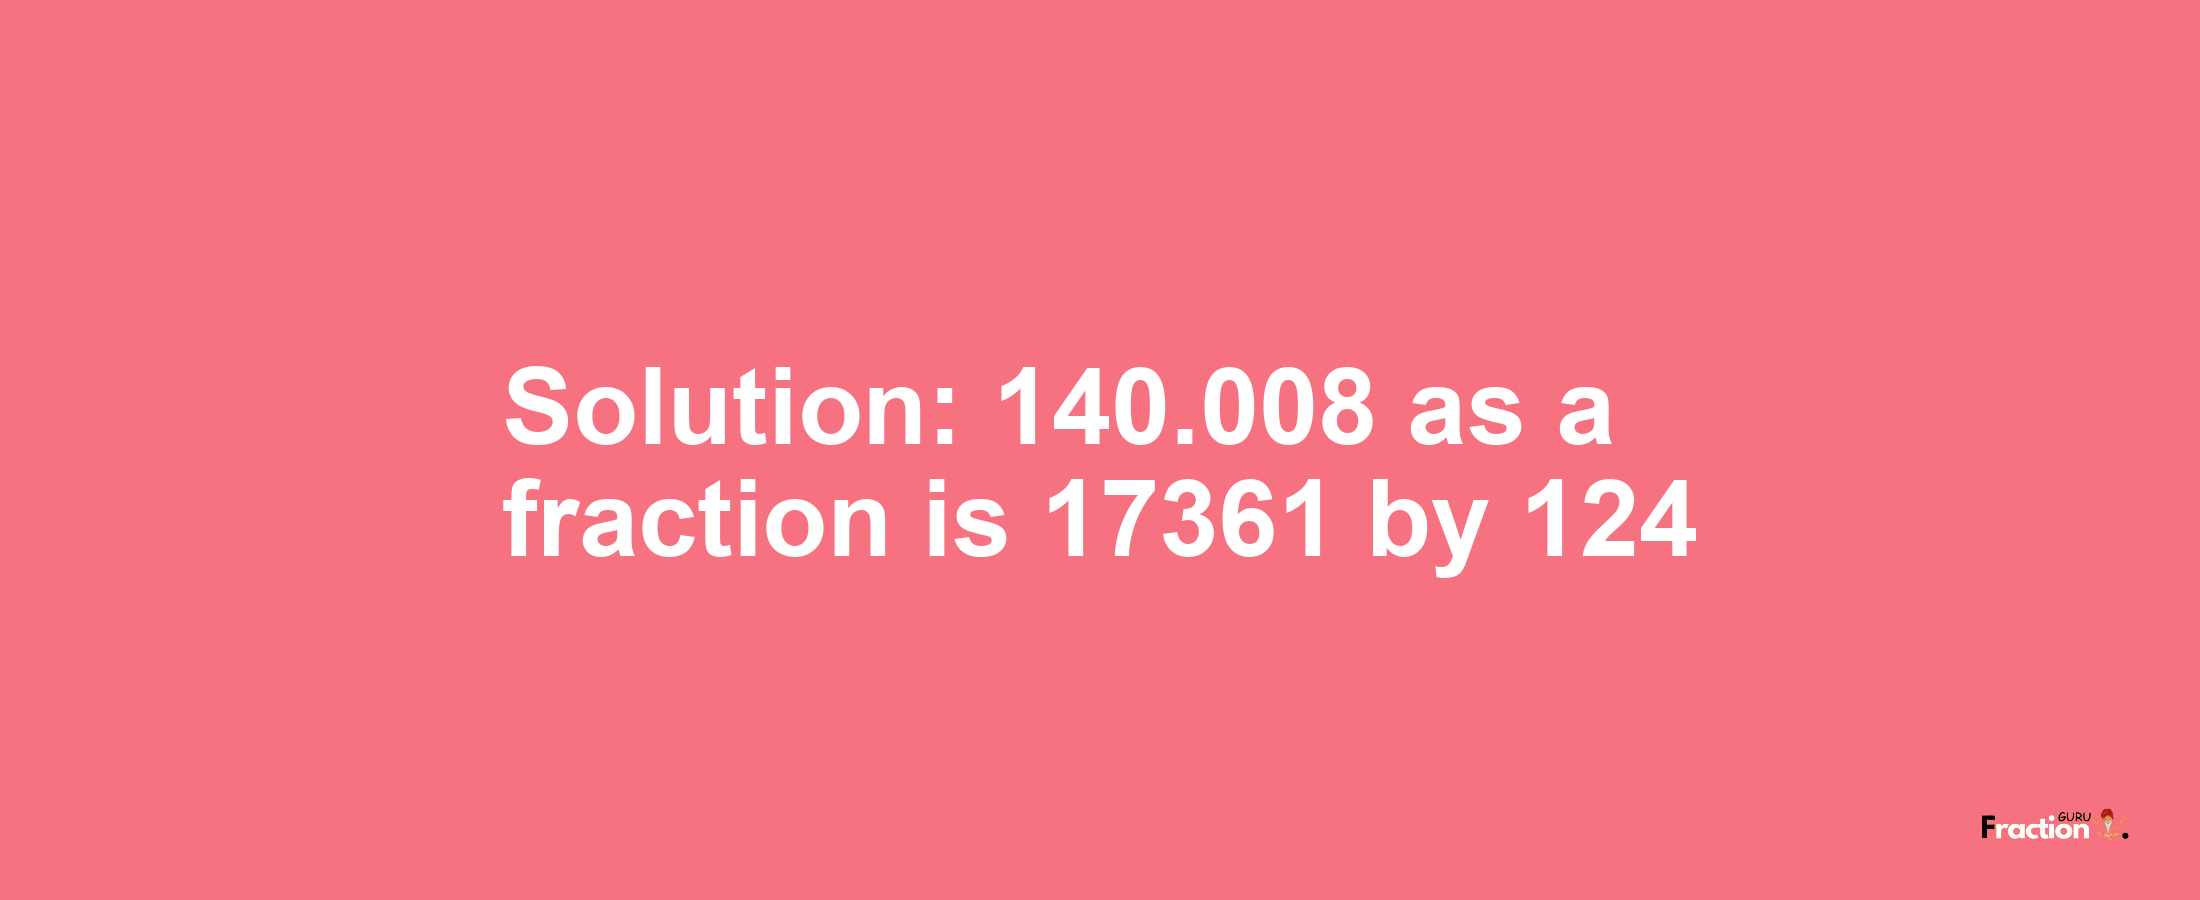 Solution:140.008 as a fraction is 17361/124